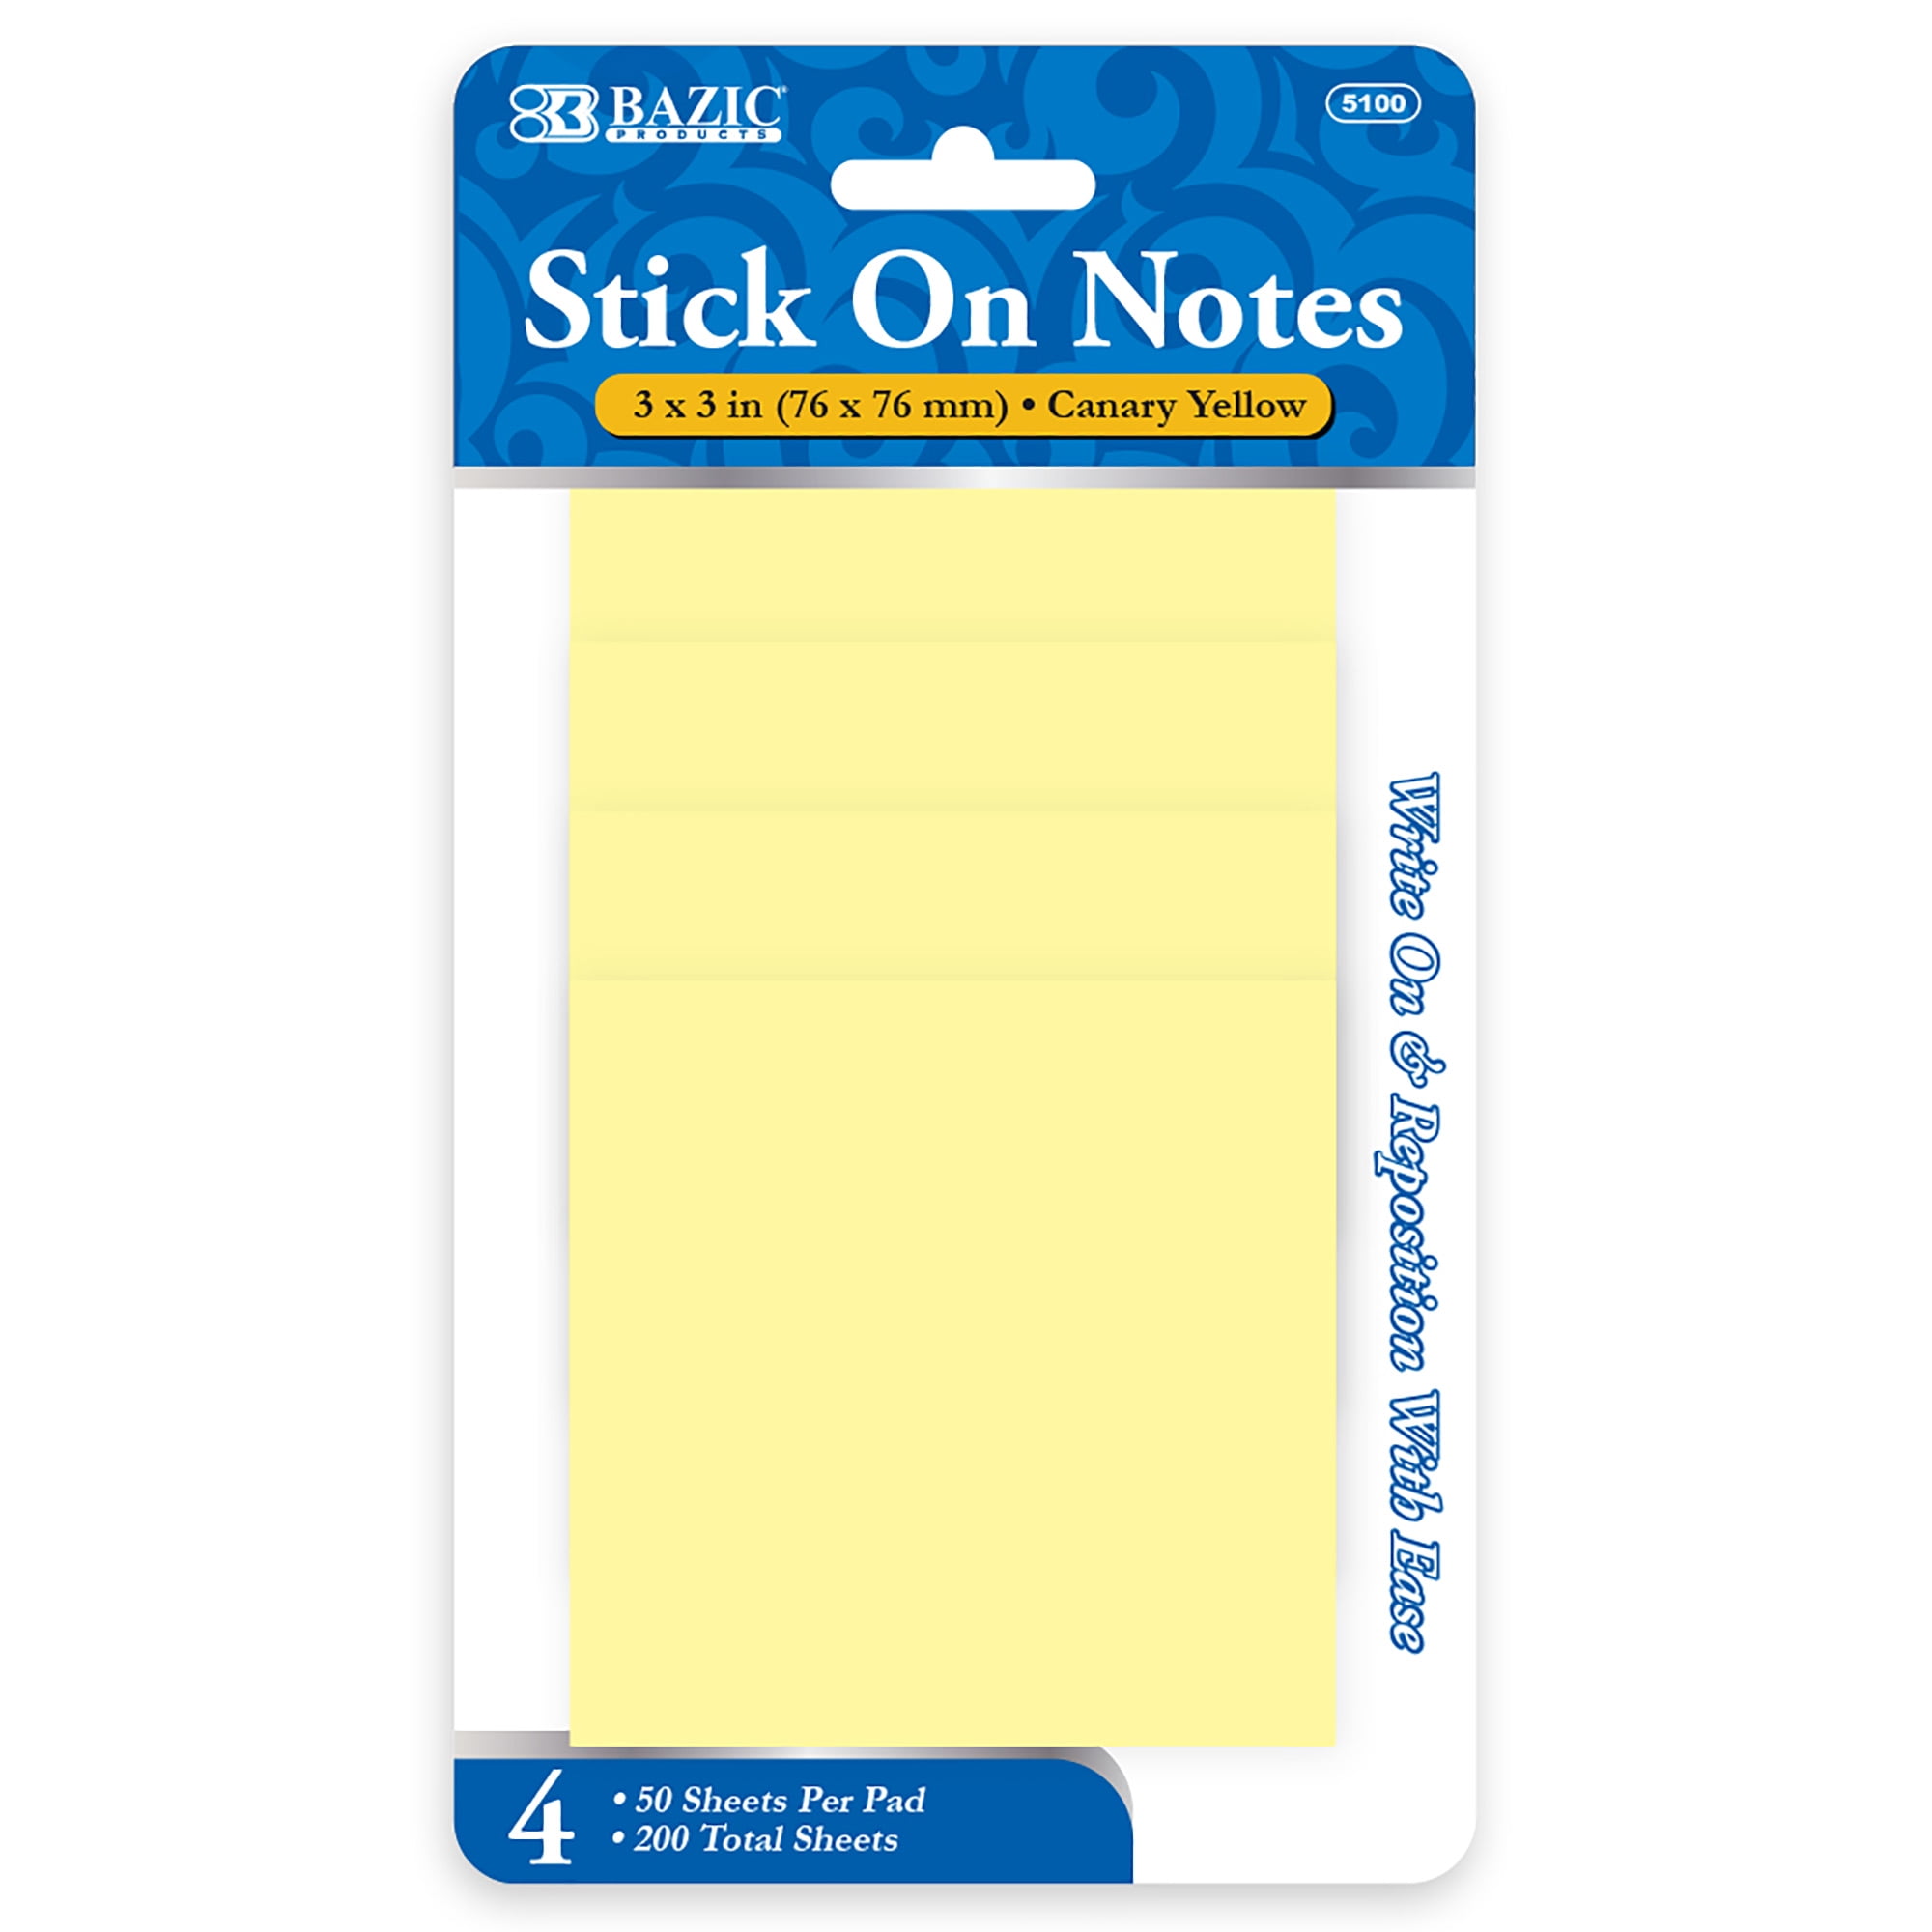 BAZIC Sticky Notes 3x3 Canary Yellow Self Stick, (200 Sheets/Pack), 1-Pack  